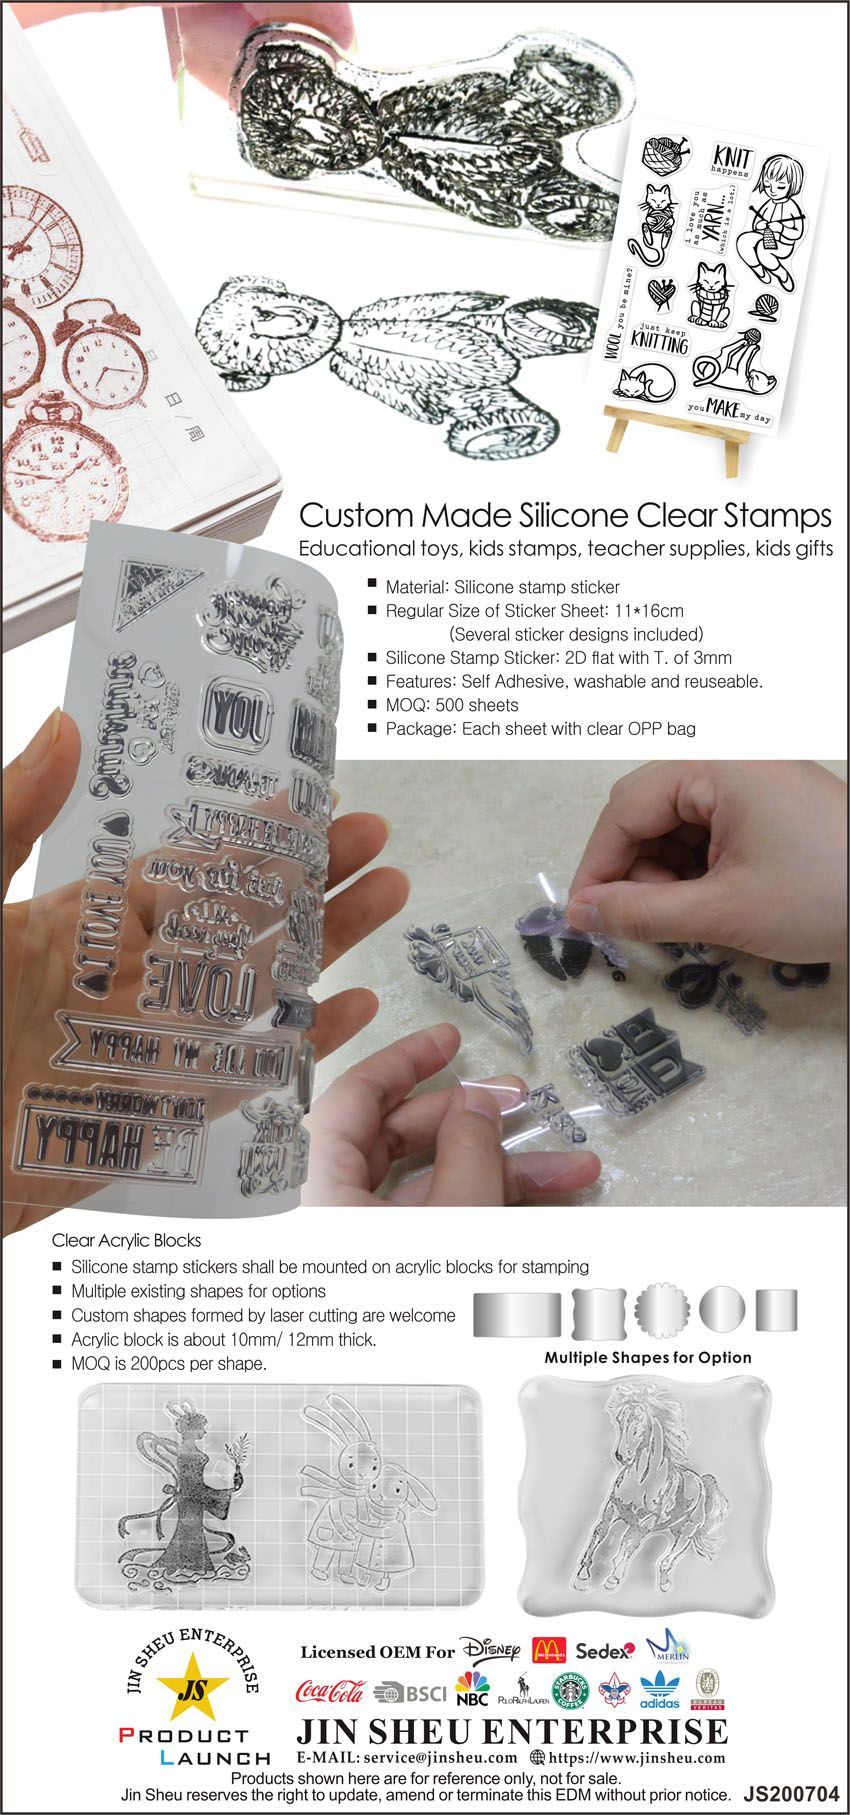 Custom Silicone Stamps